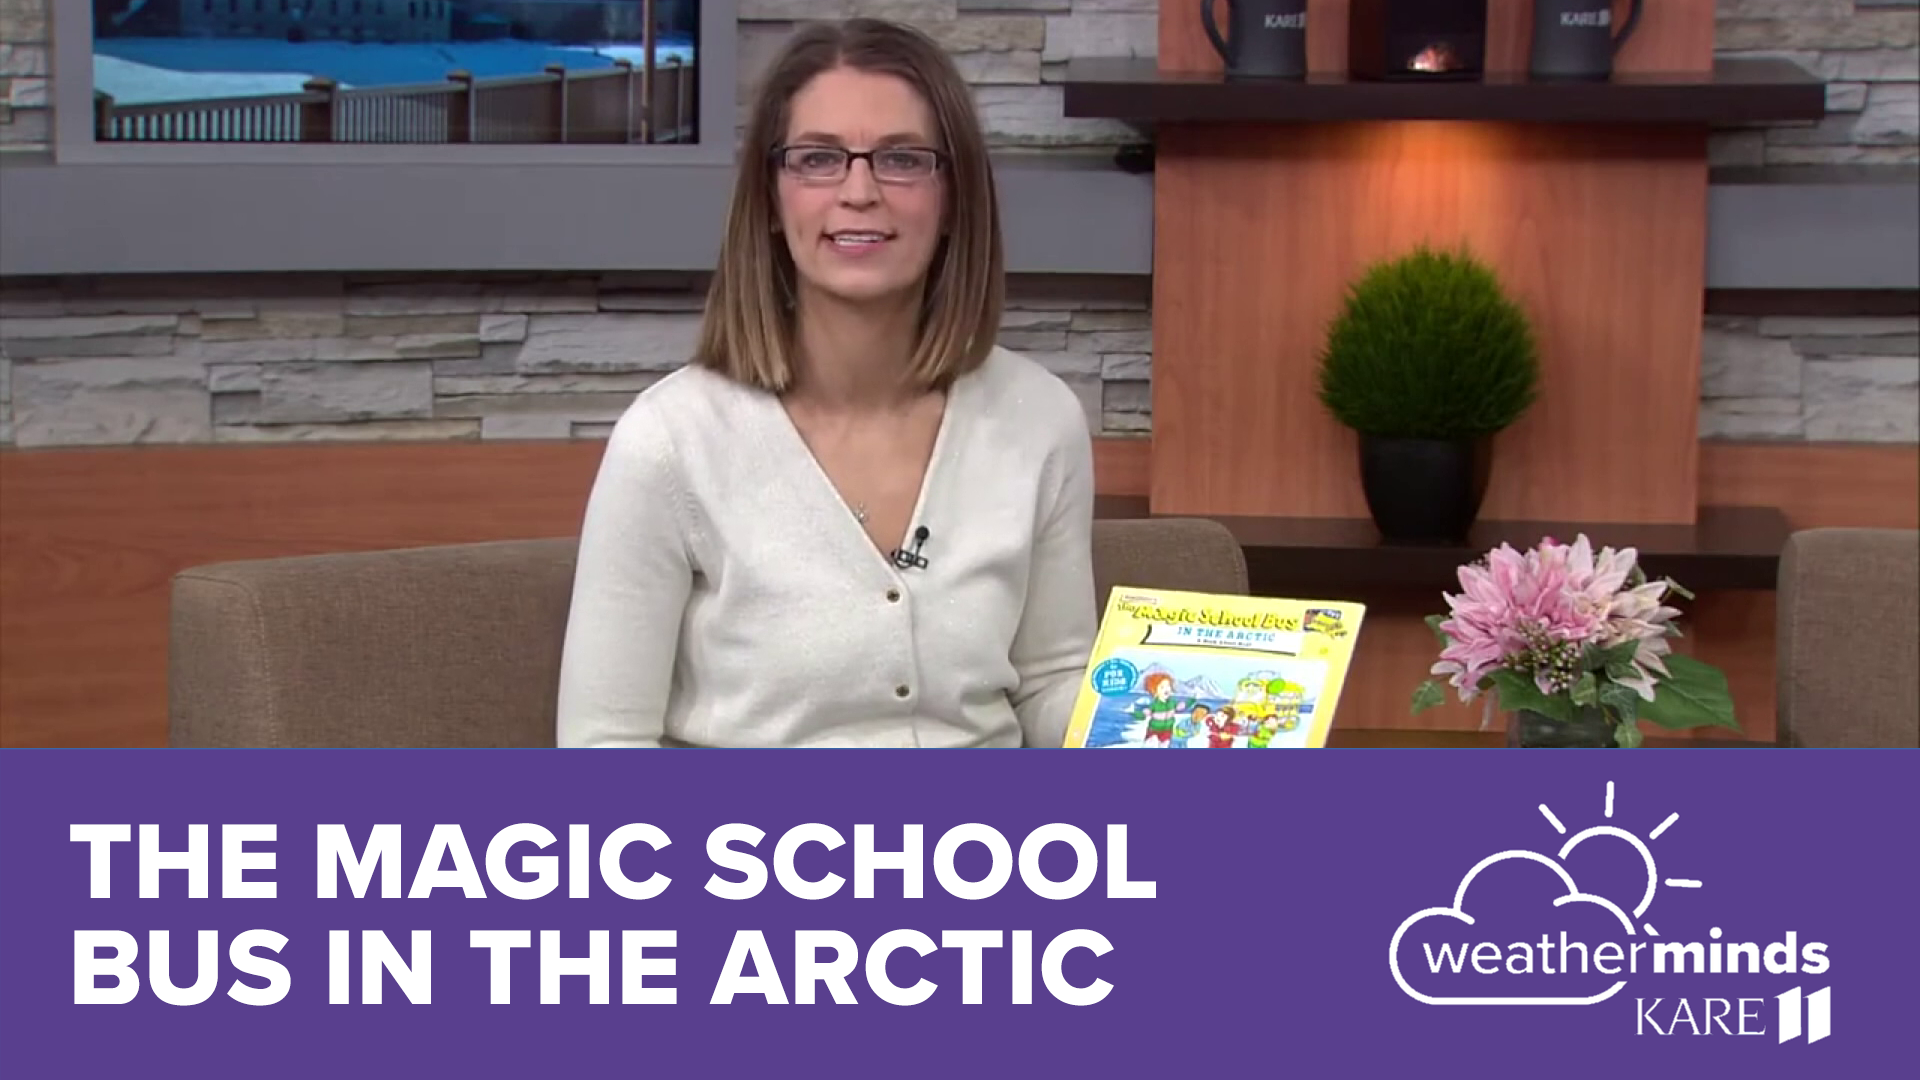 KARE 11 Meteorologist Laura Betker reads one of her favorite children’s books about cold weather science.